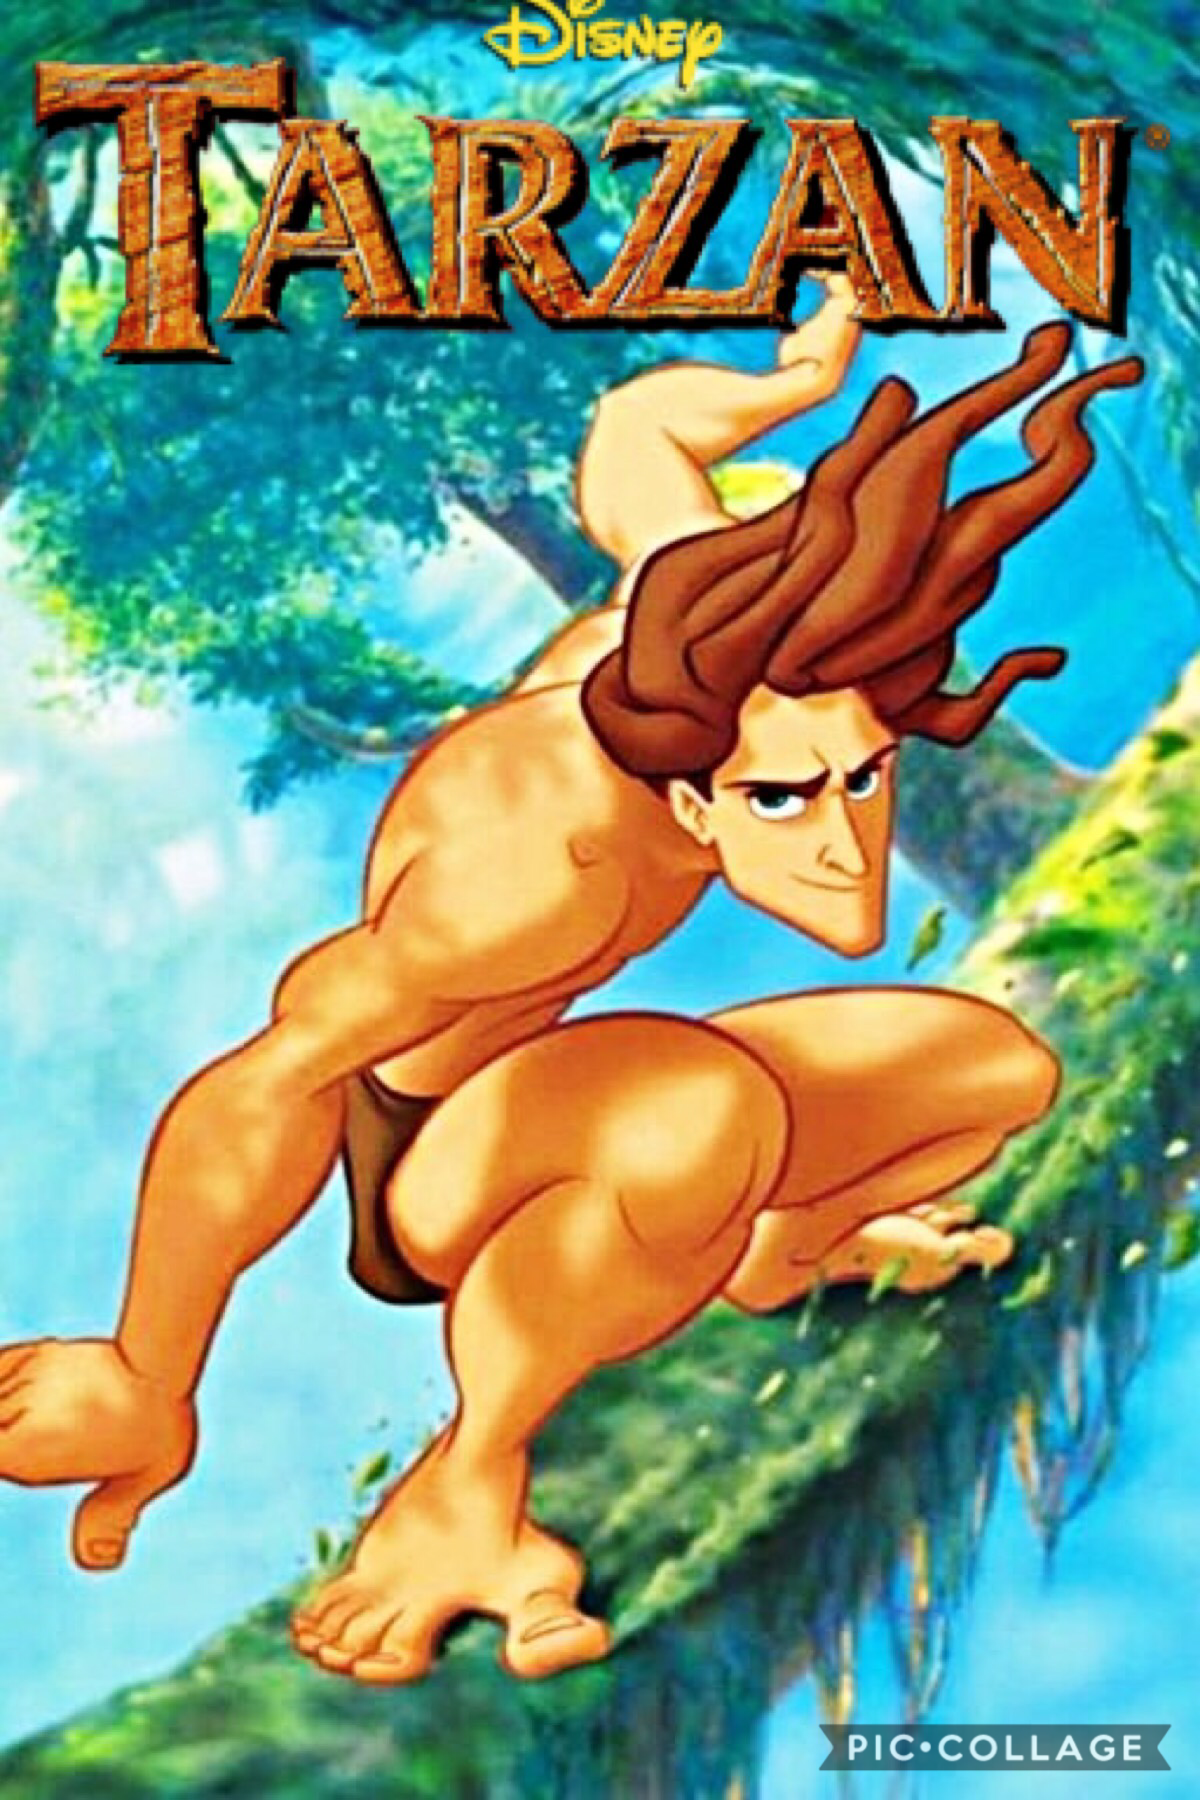 This is Tarzan surfing through the trees